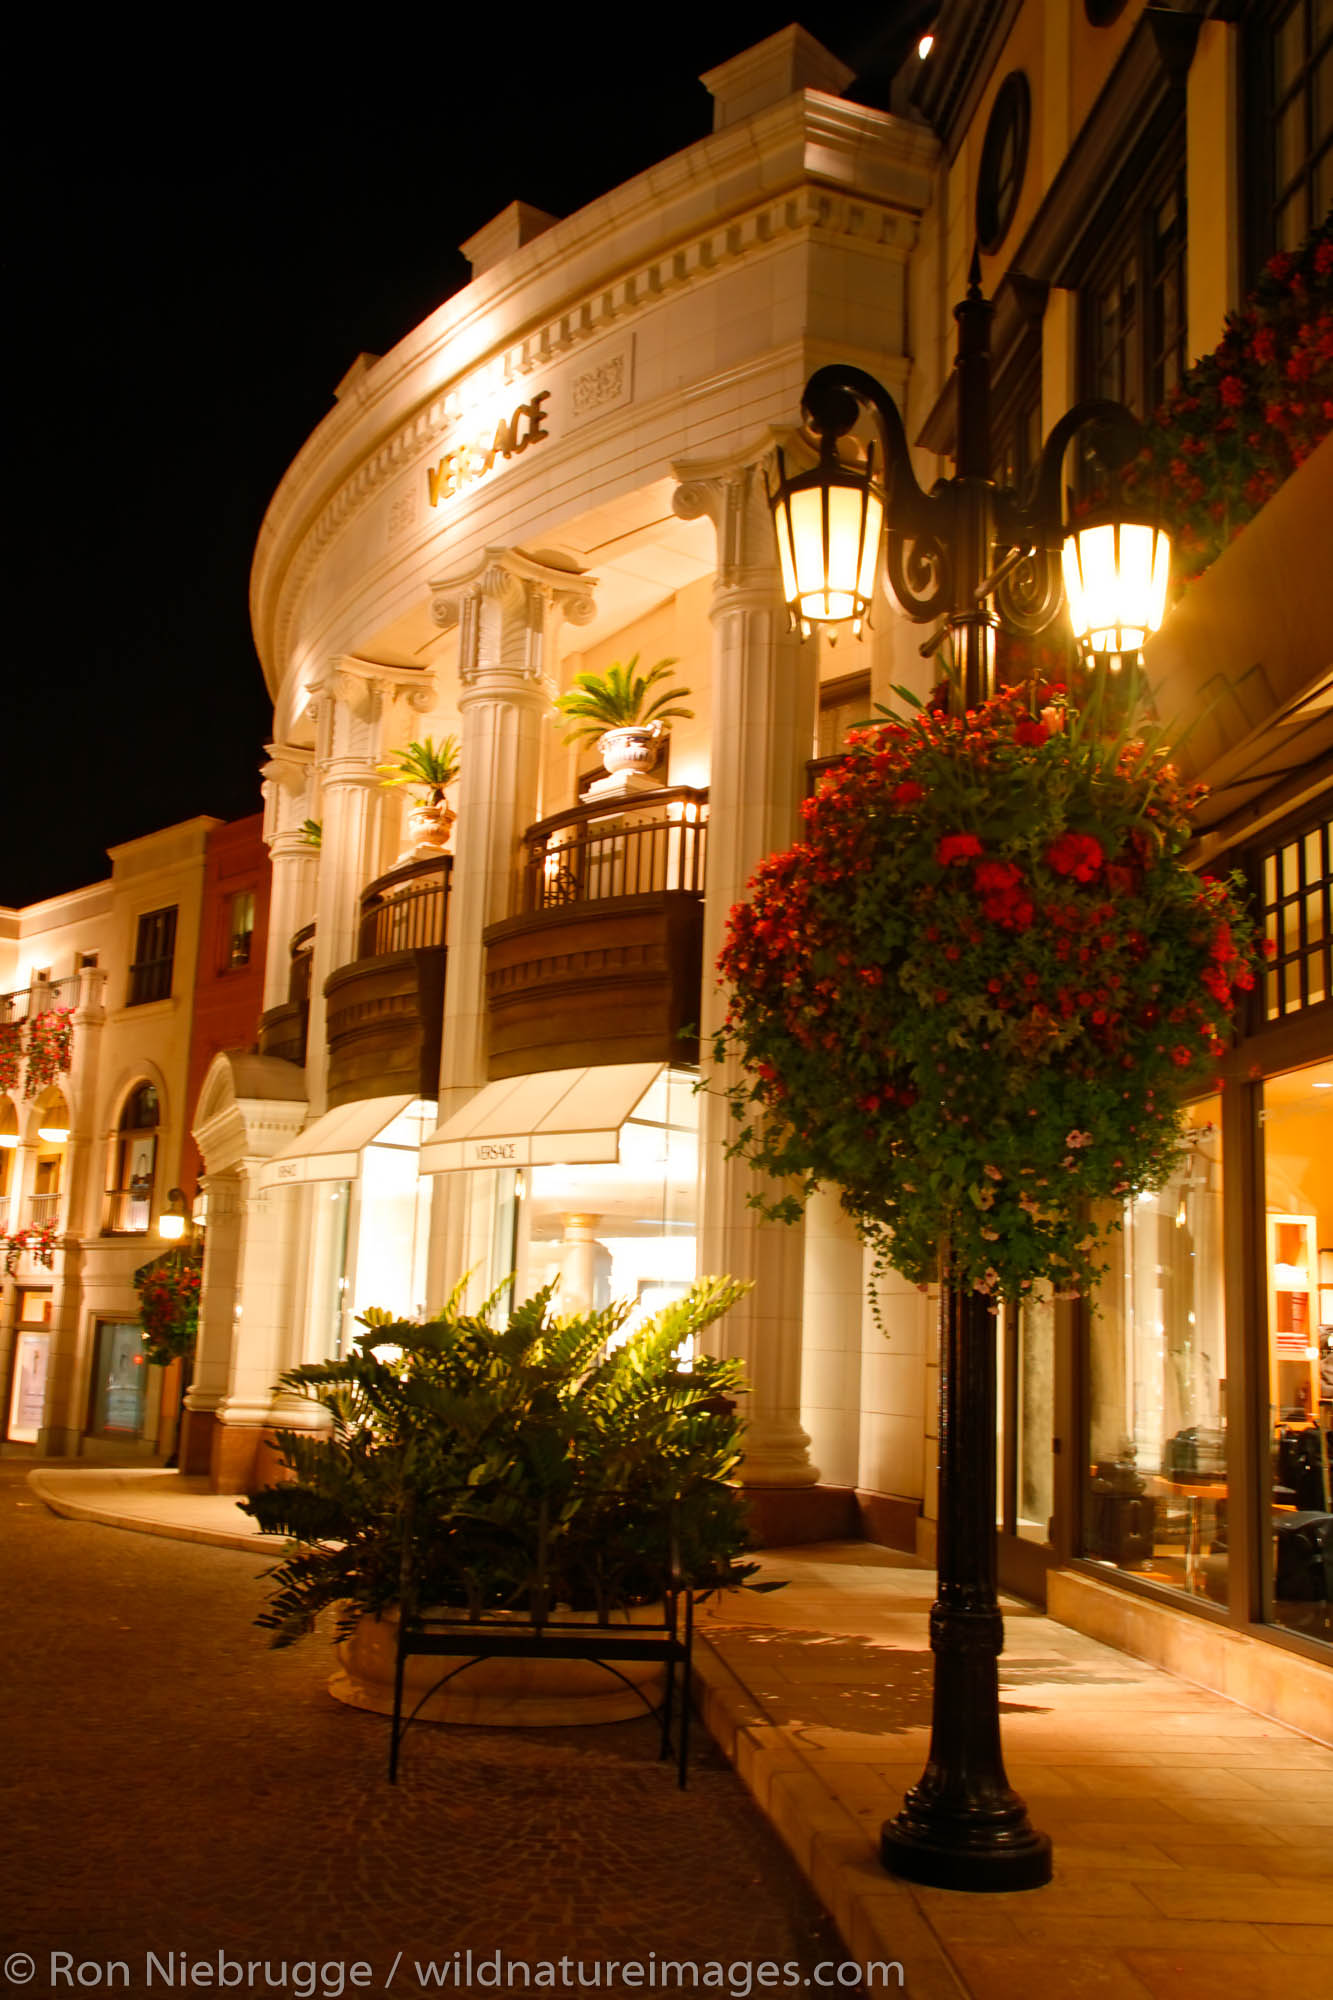 Rodeo Drive in Beverly Hills, Los Angeles, California.